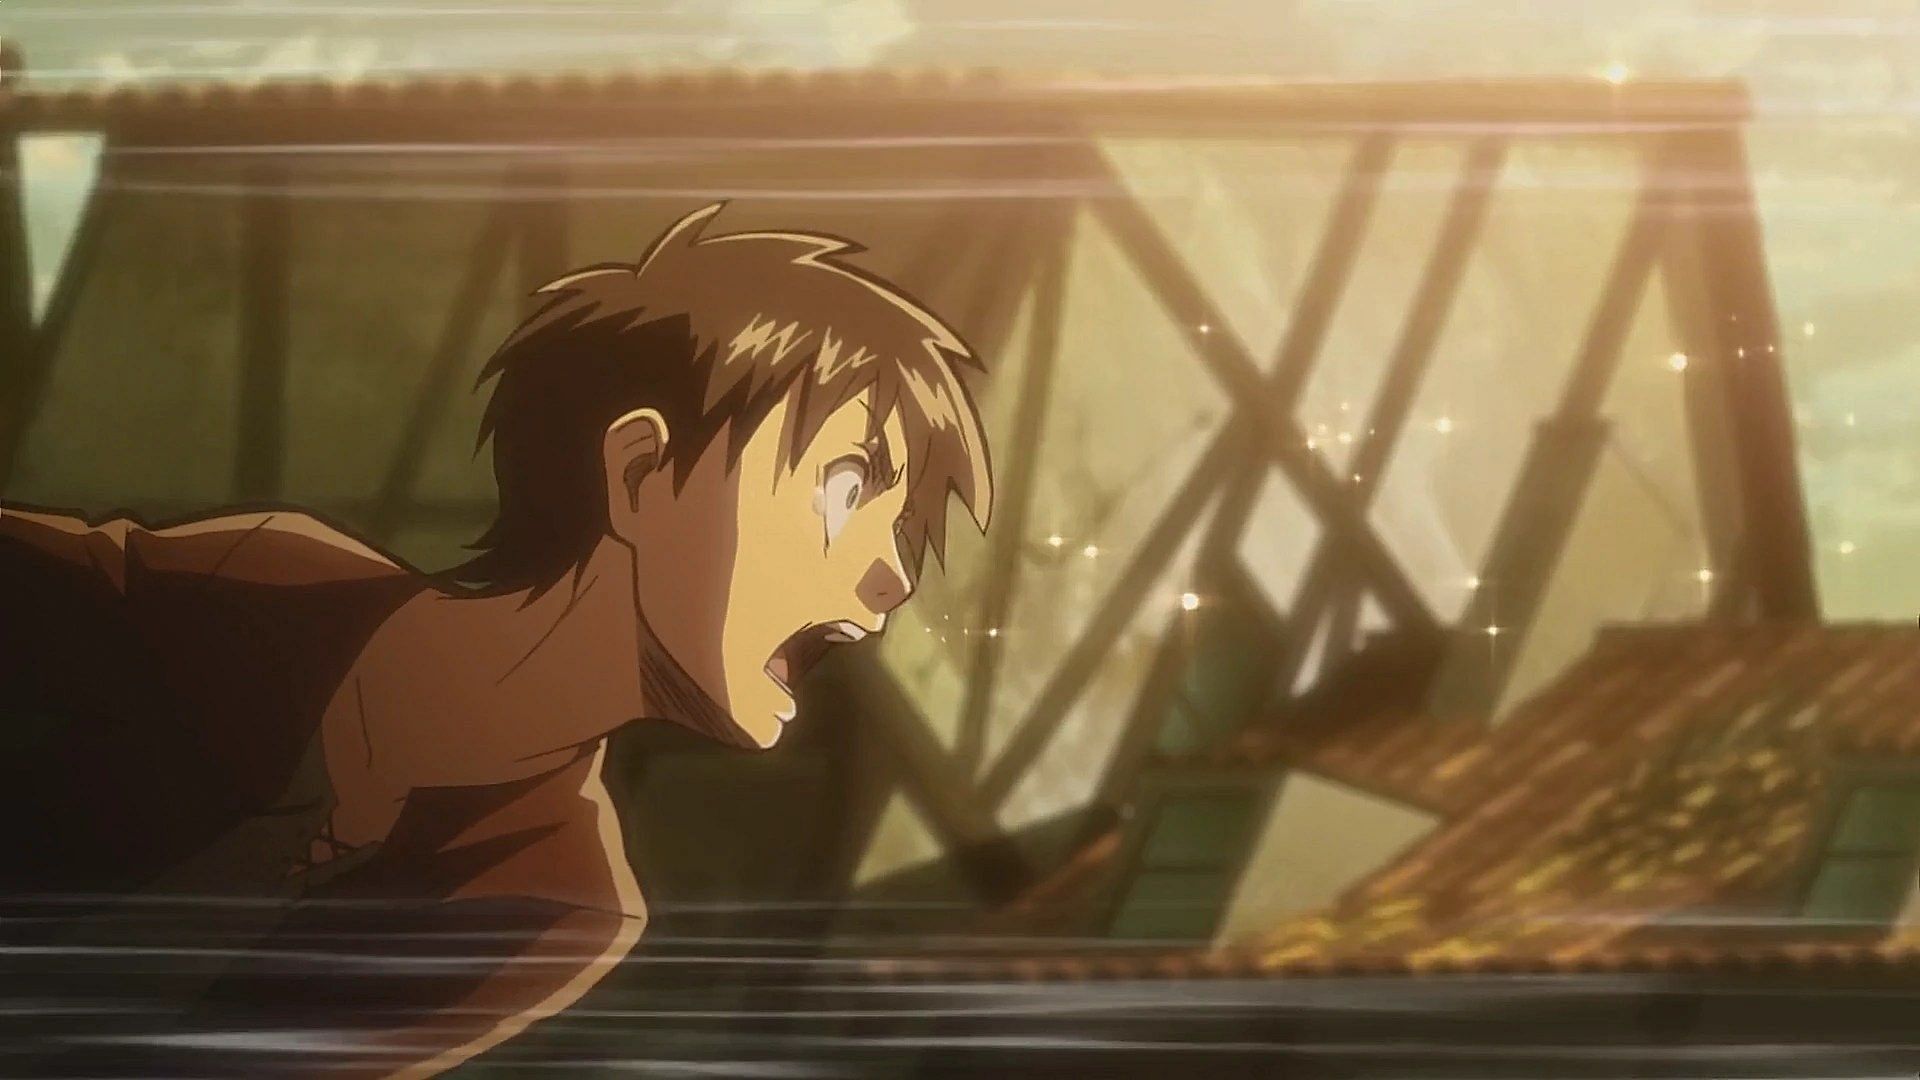 Eren watches his mother Carla get eaten by a Titan, as seen in Season 1 of the Attack on Titan anime (Image via Wit Studio)